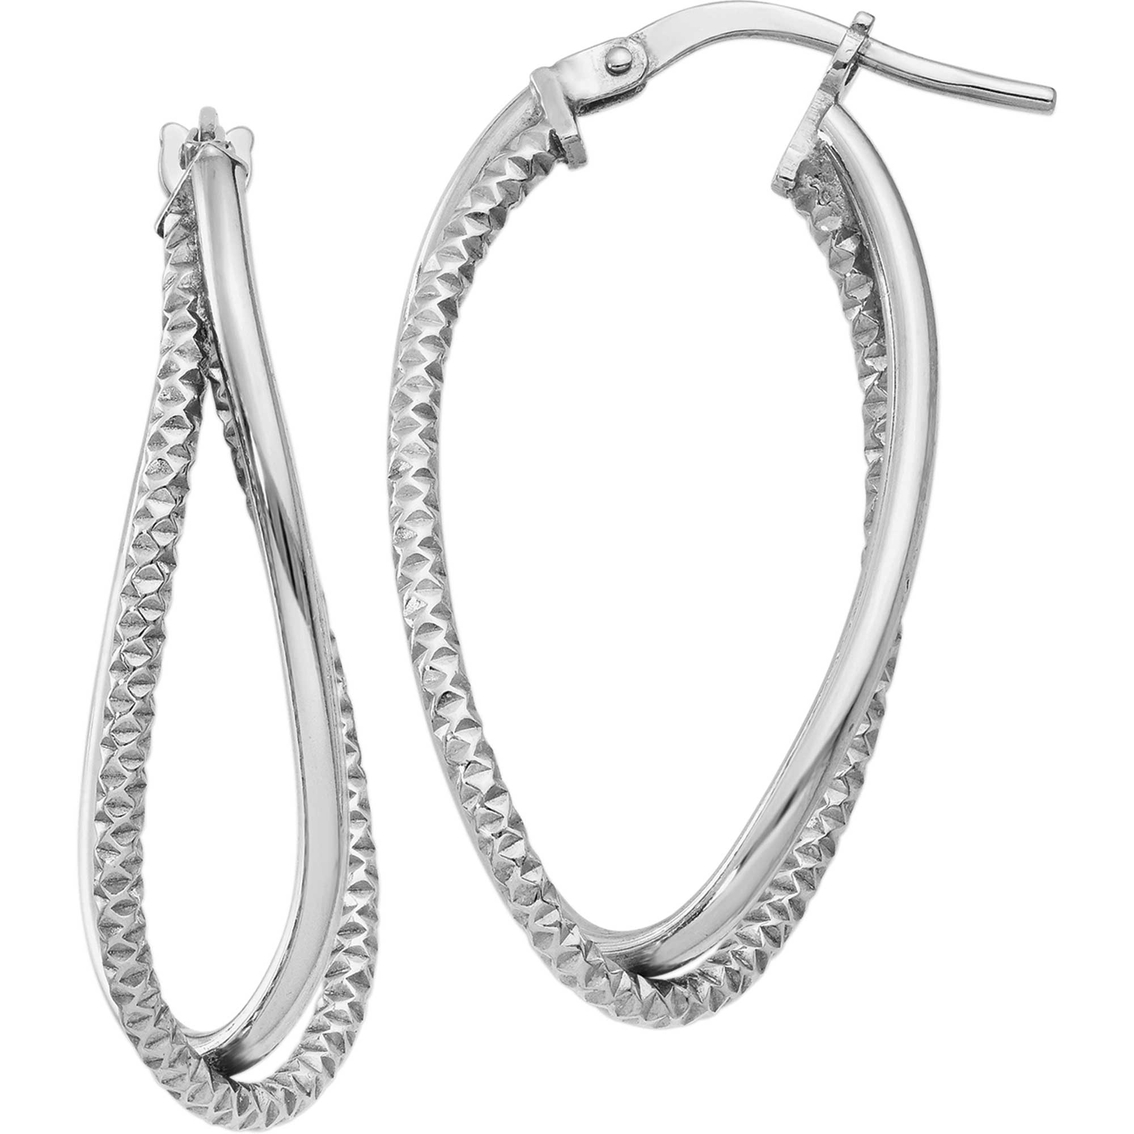 Sterling Silver Polished and Textured Fancy Earrings - Image 2 of 2